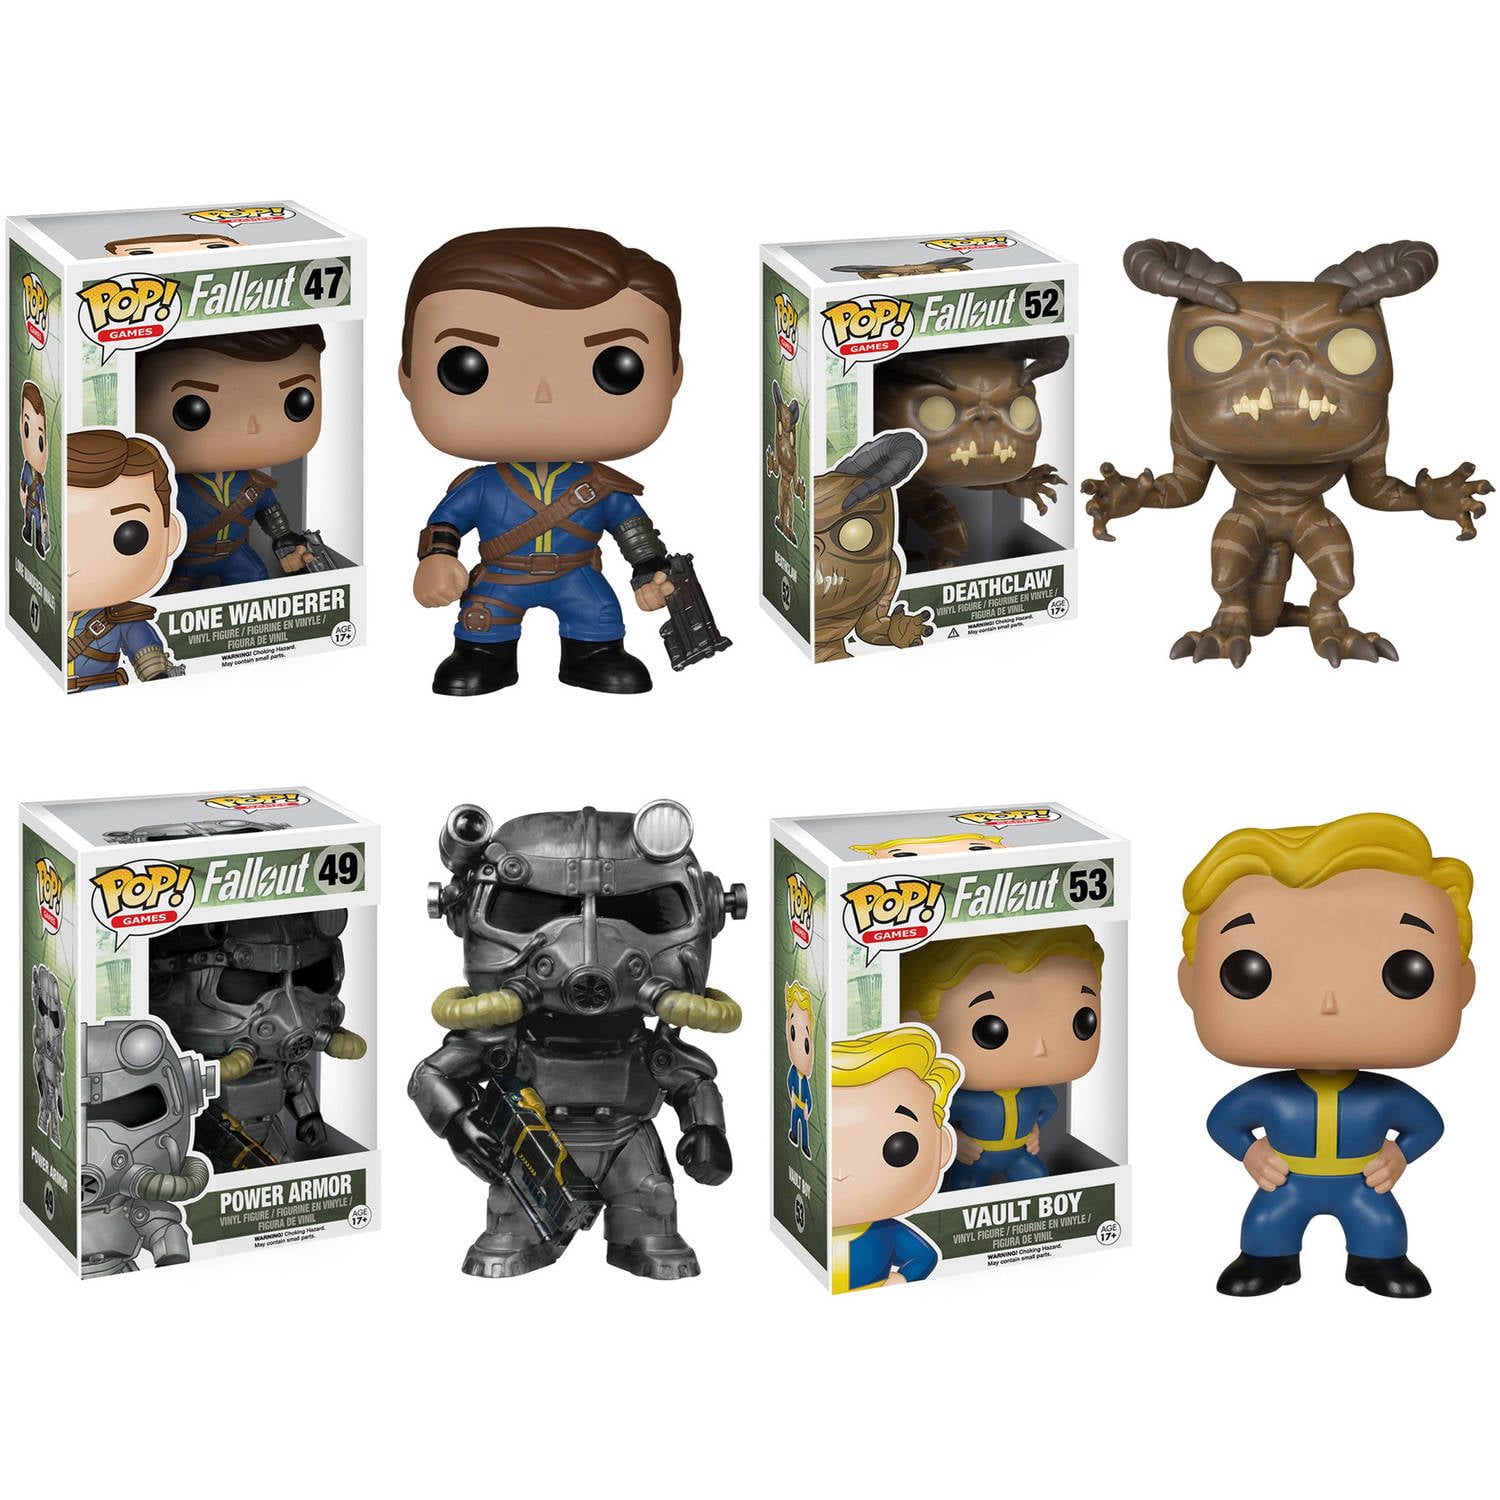 Fallout POP! Games Vinyl Collectors Set, Lone Wanderer Male, Deathclaw, Power Armor and Vault Boy -